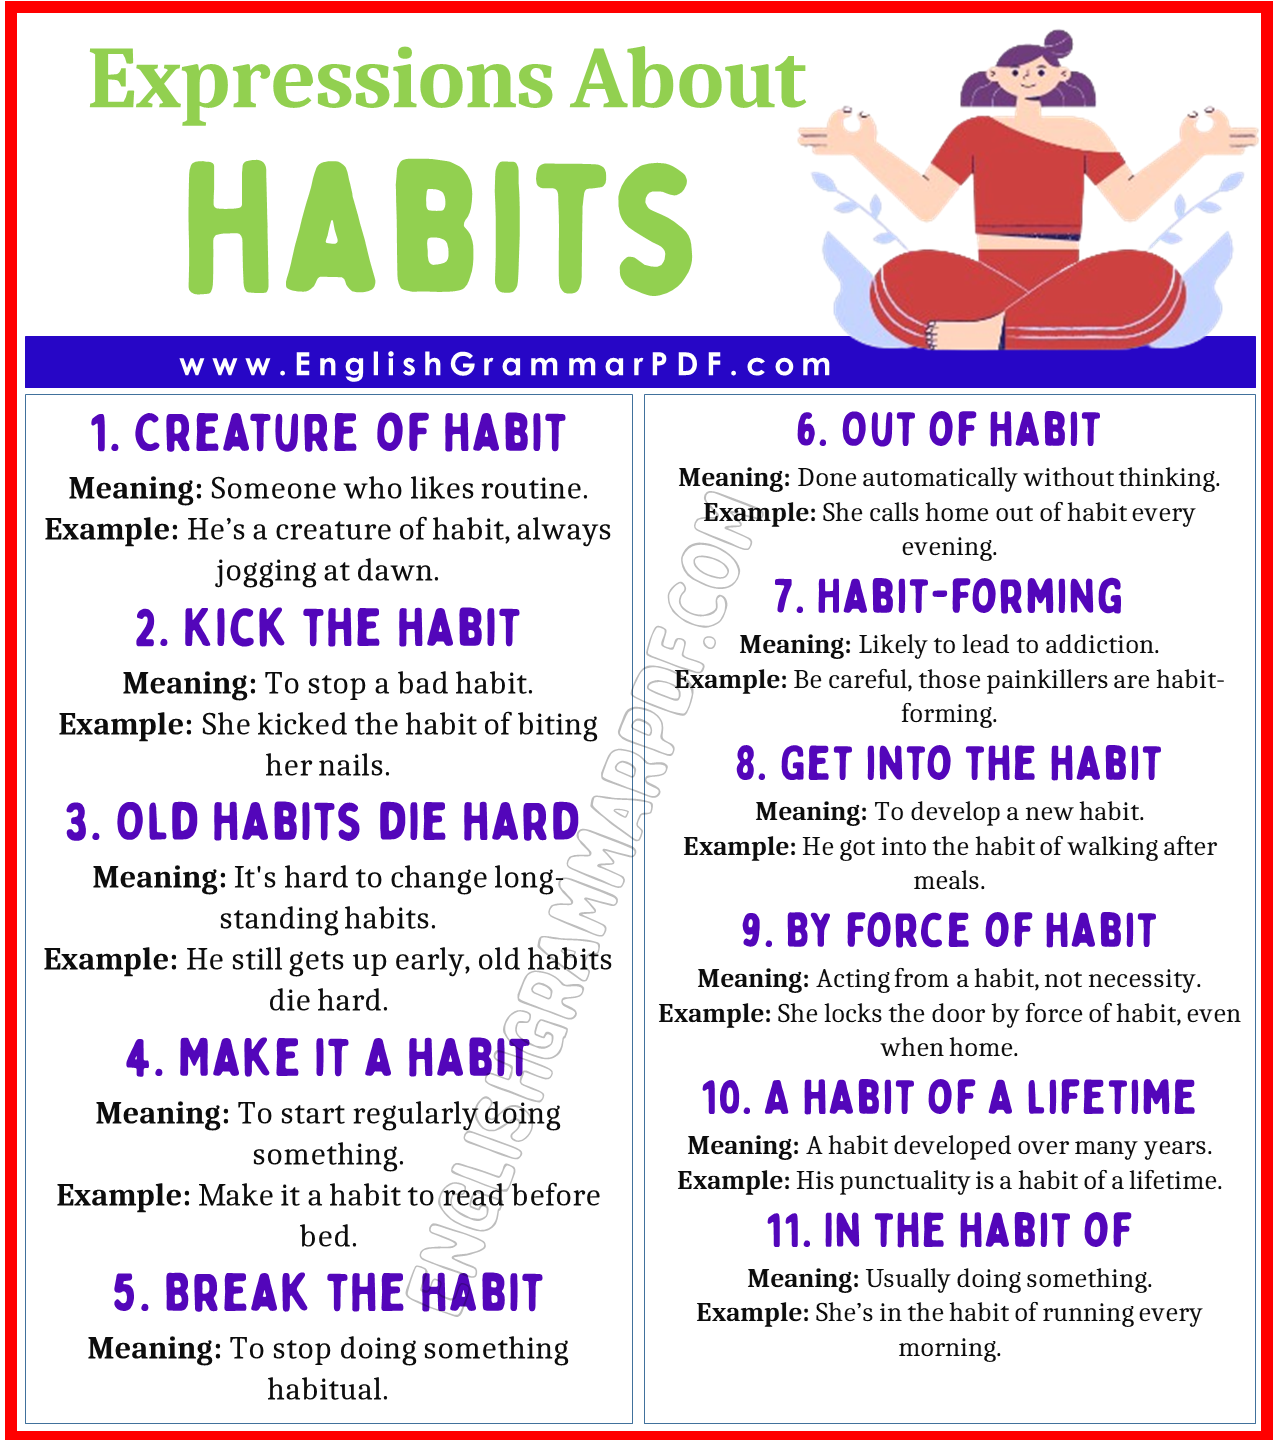 Expressions About Habits